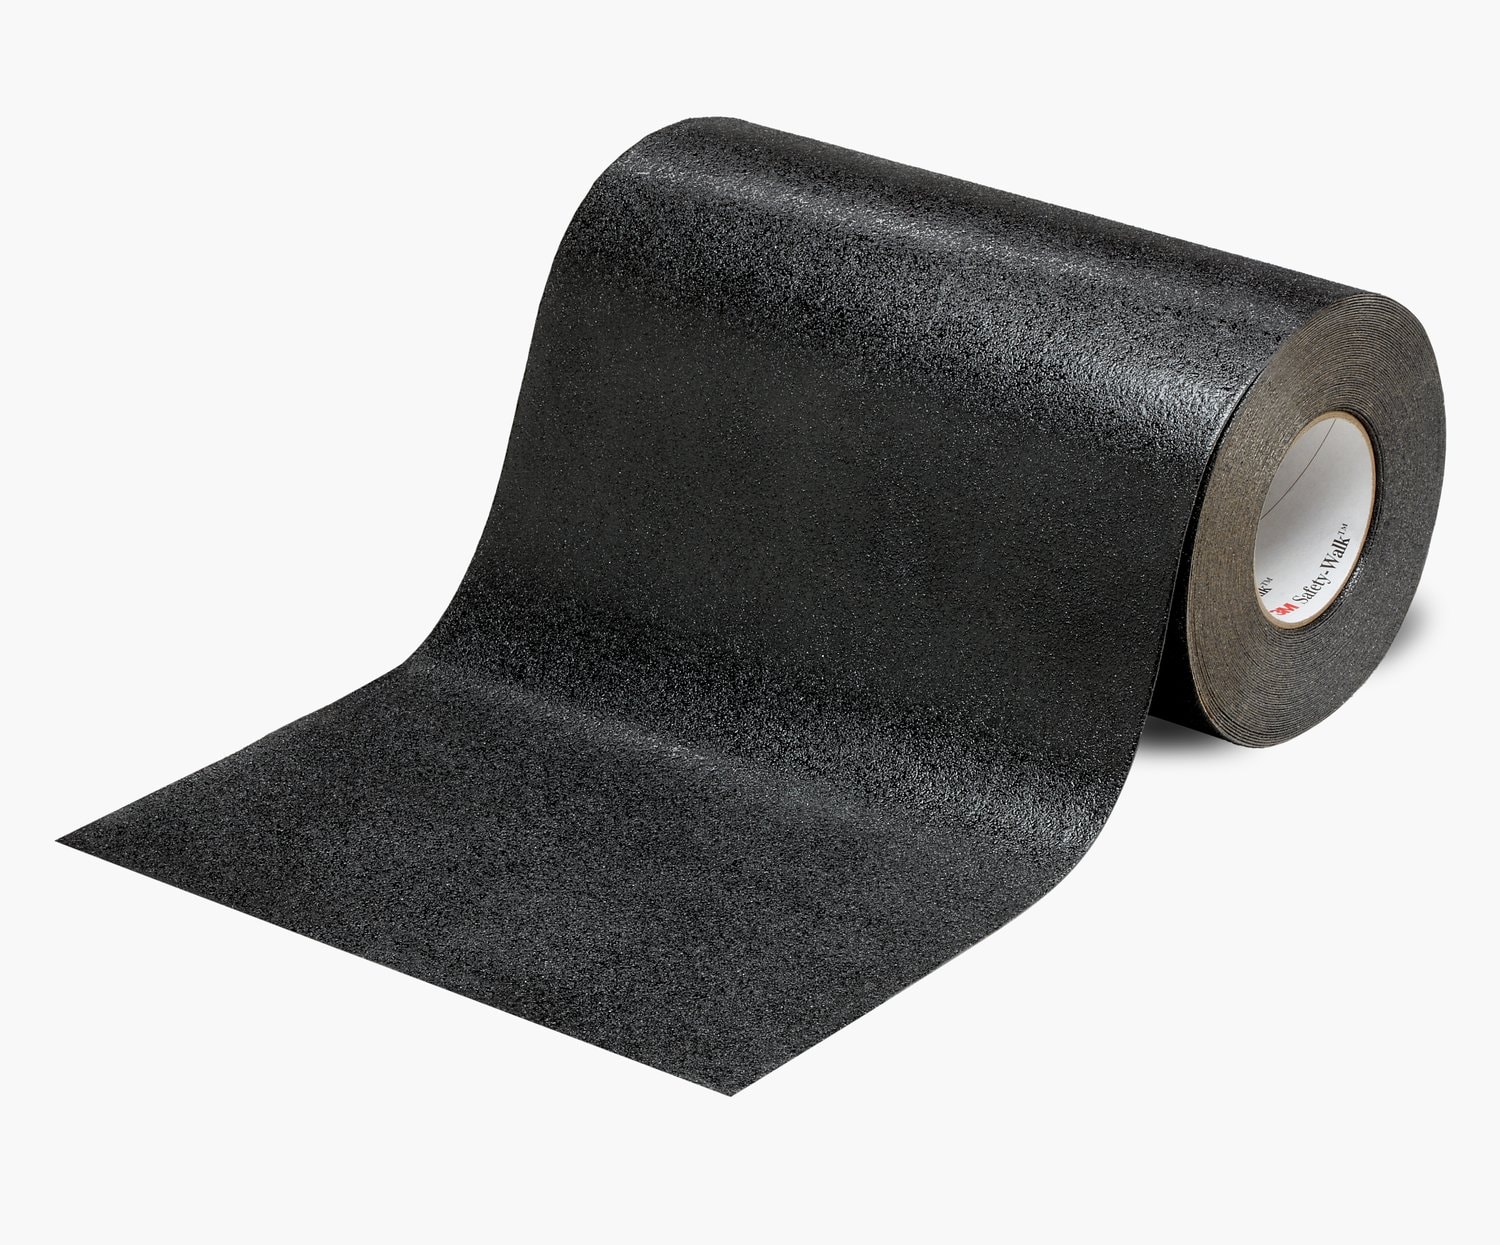 7100011785 - 3M Safety-Walk Slip-Resistant Conformable Tapes & Treads 510, Black, 2
inch Wide & Over, Configurable Roll